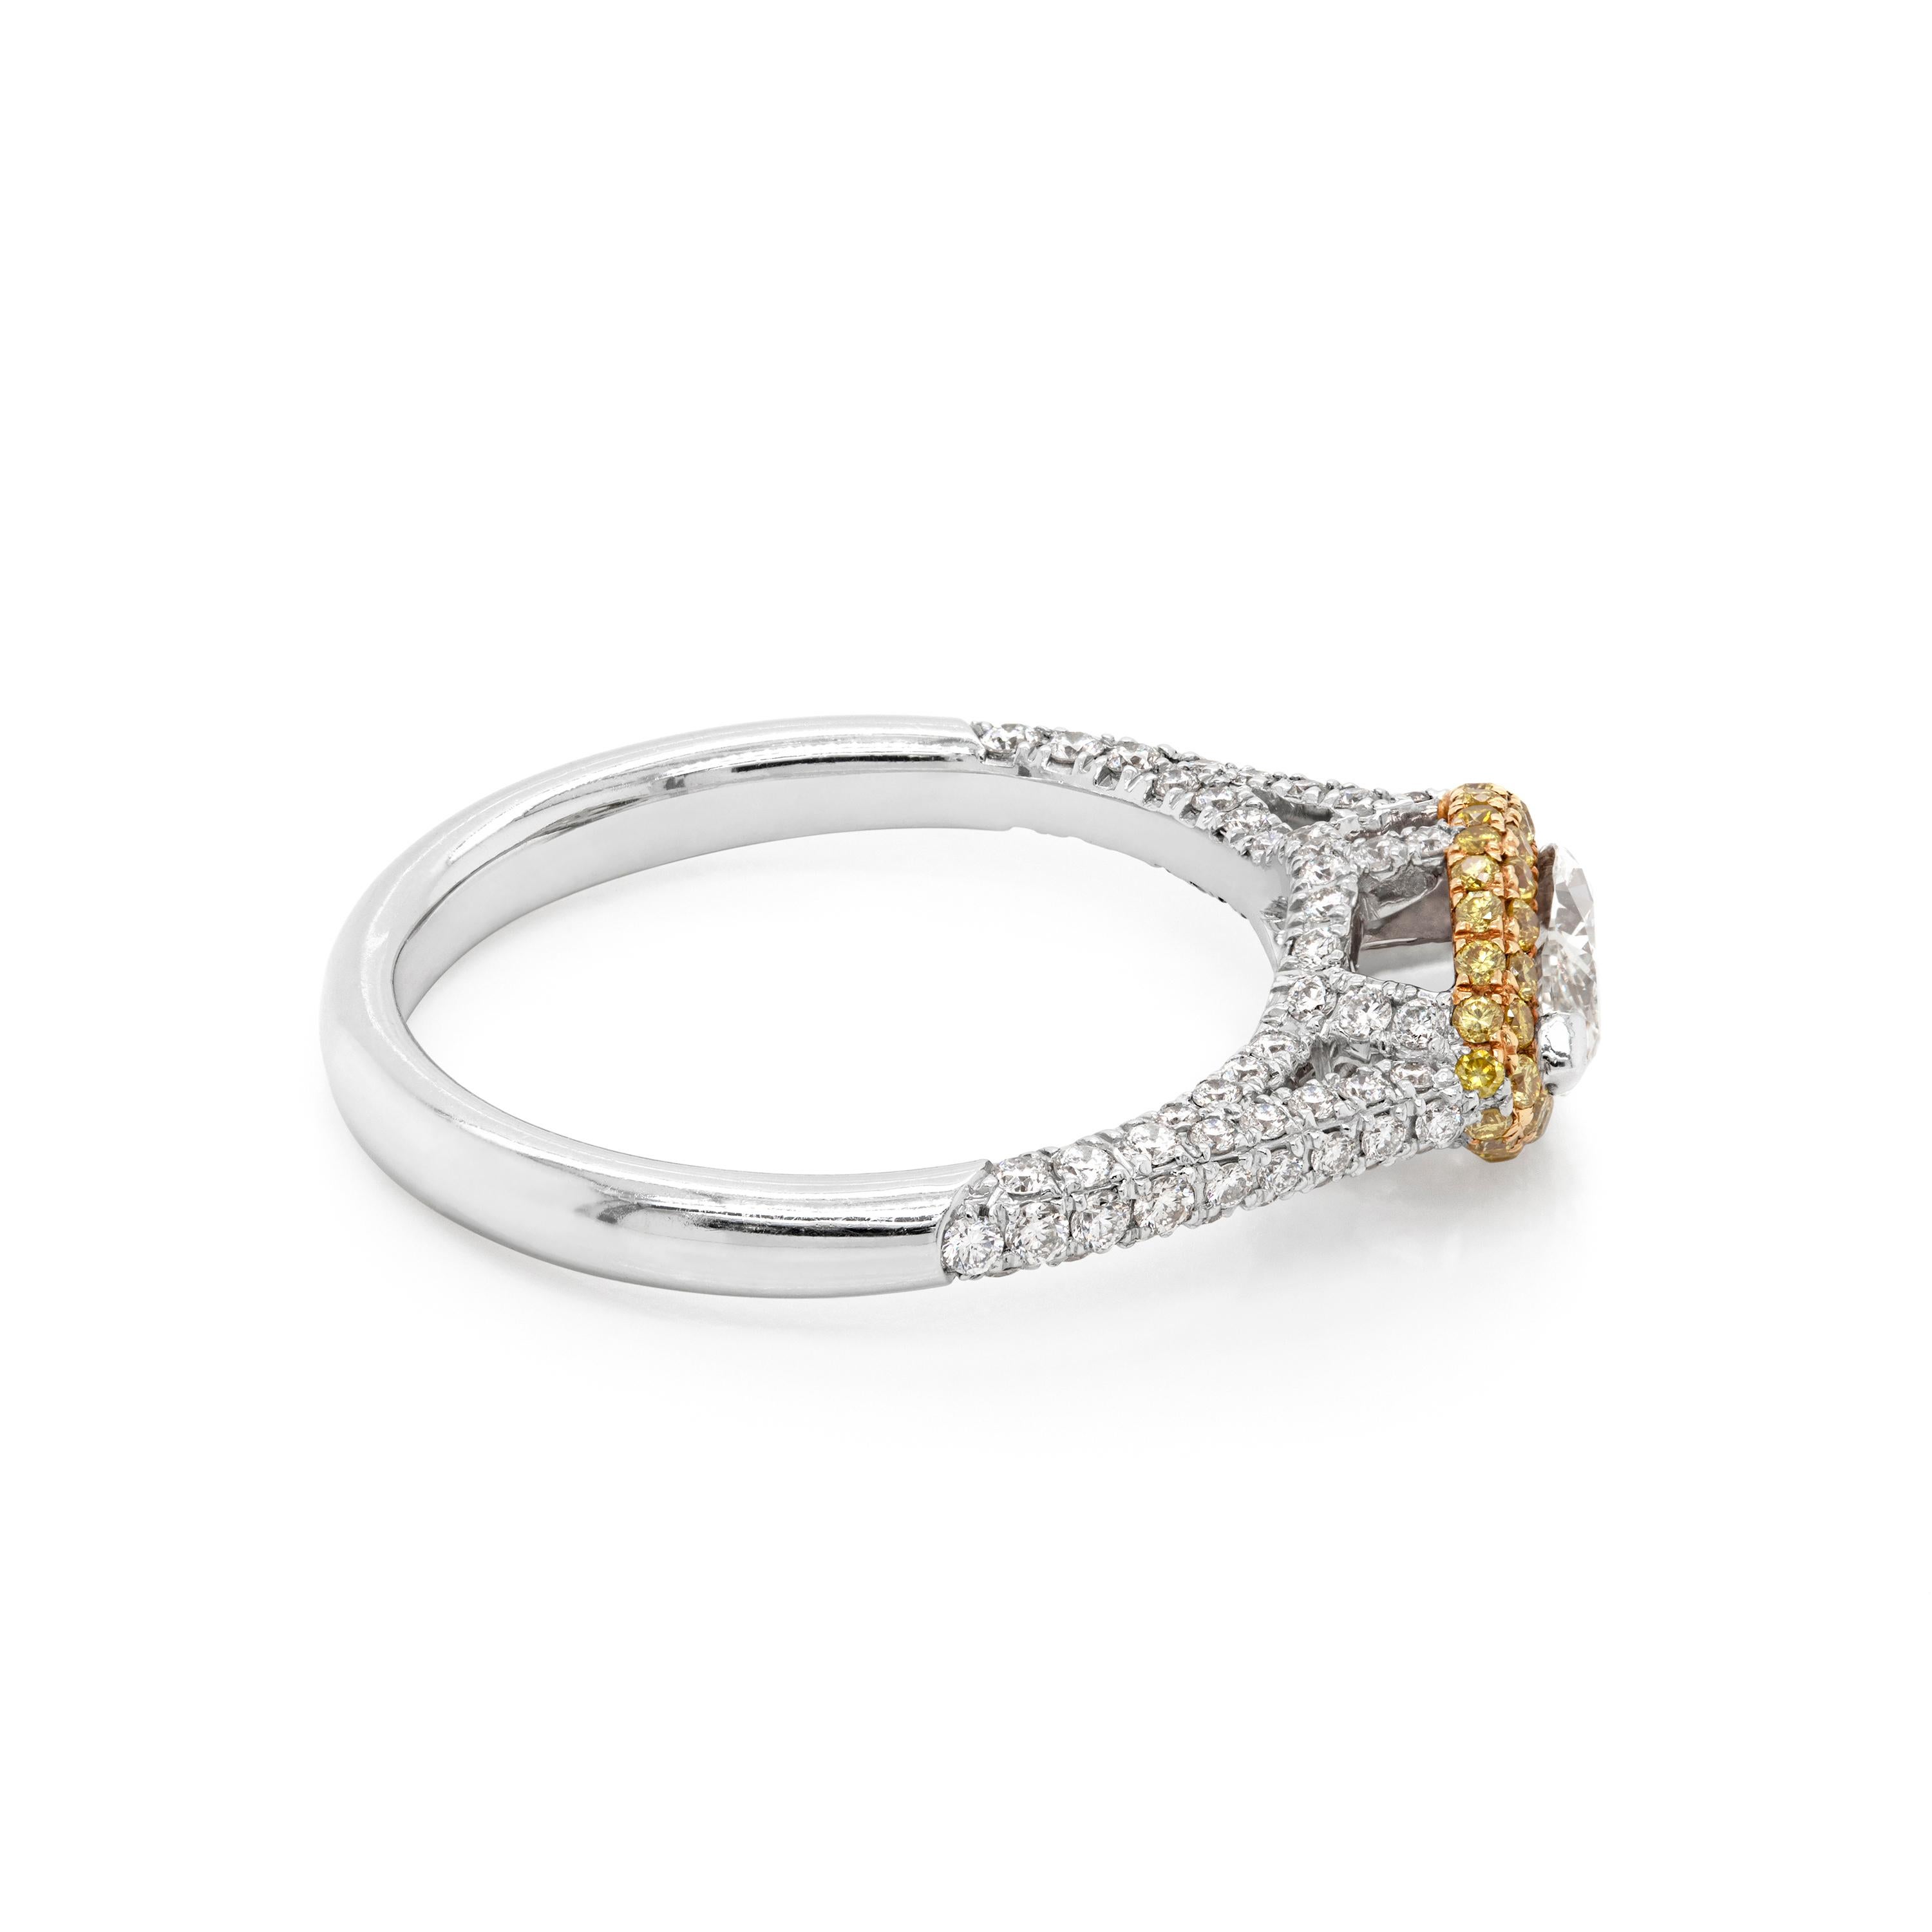 This stunning ring features a fine quality horizontally set marquise shape diamond weighing 0.60ct mounted in a 'V' claw, open back setting. The center stone is surrounded by a beautiful halo of 44 round fancy yellow diamonds totaling to